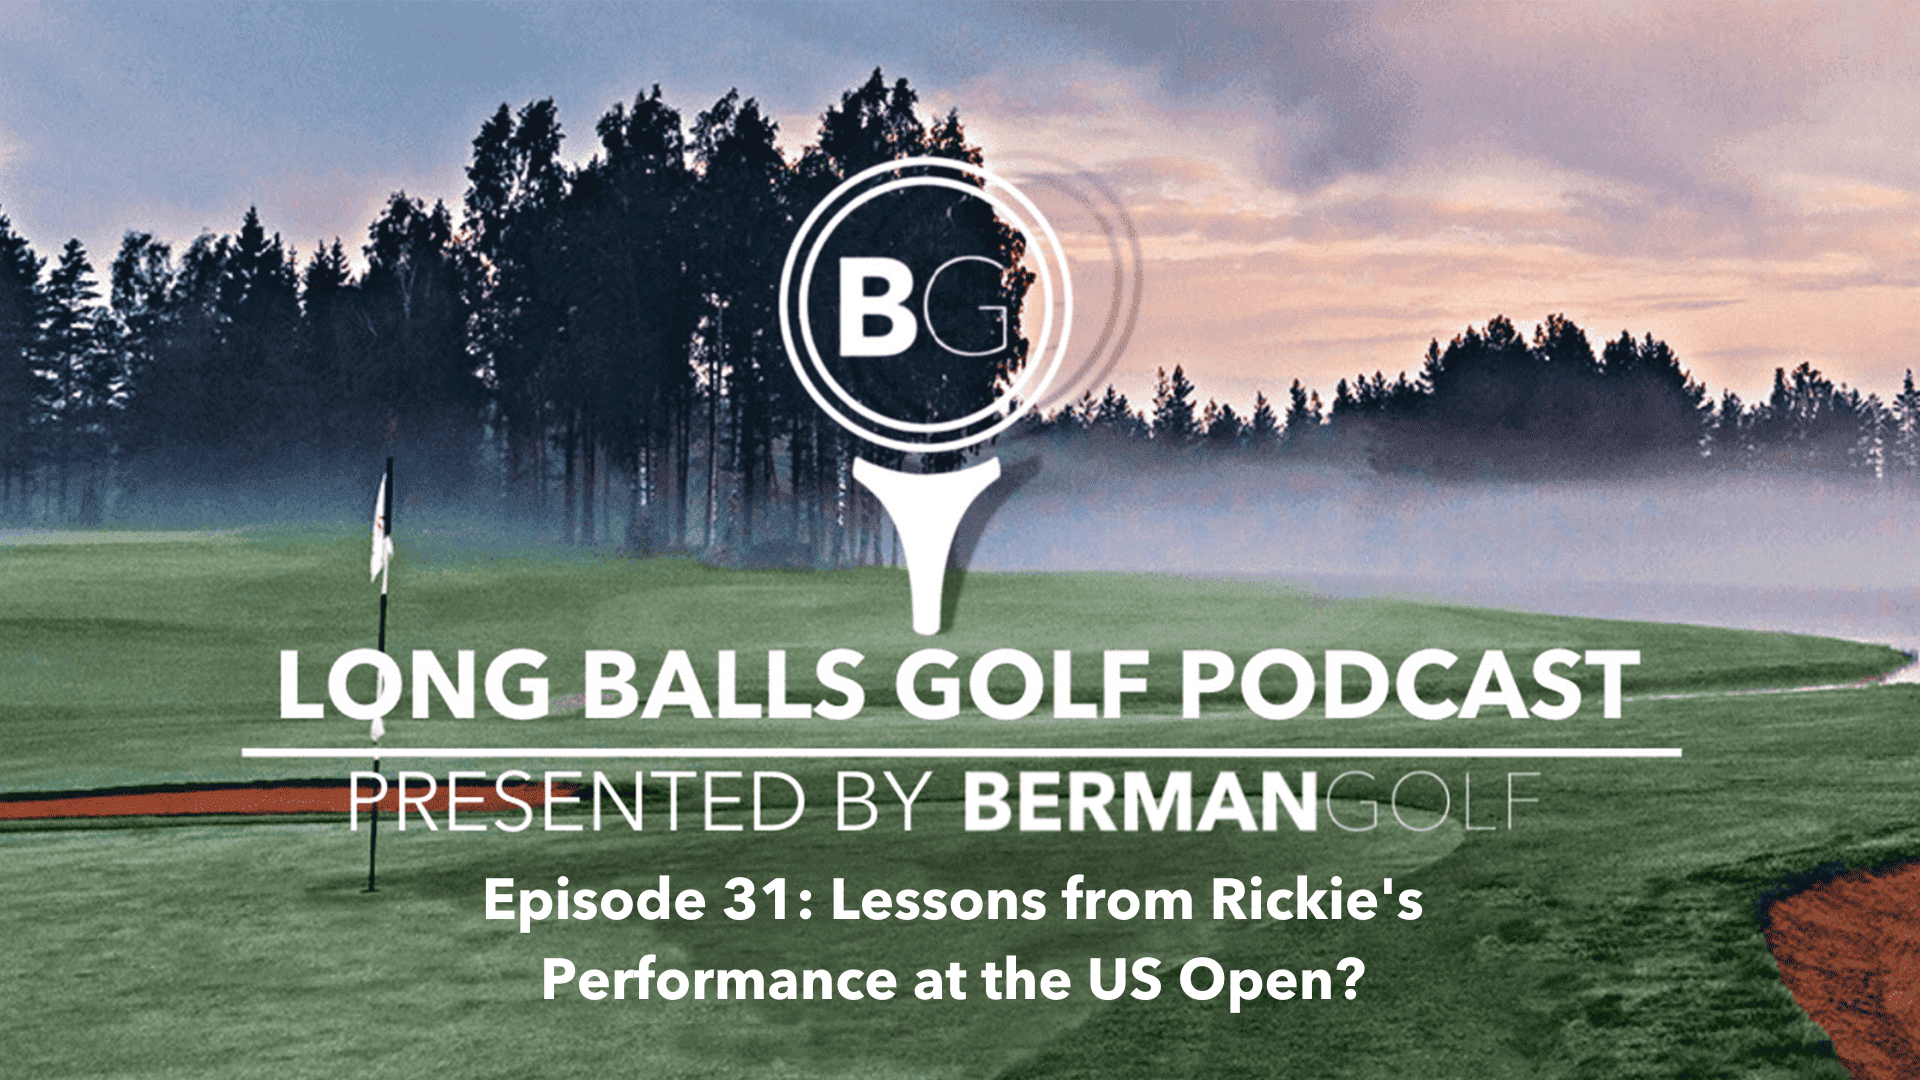 Episode 31: Lessons from Rickie’s Performance at the US Open